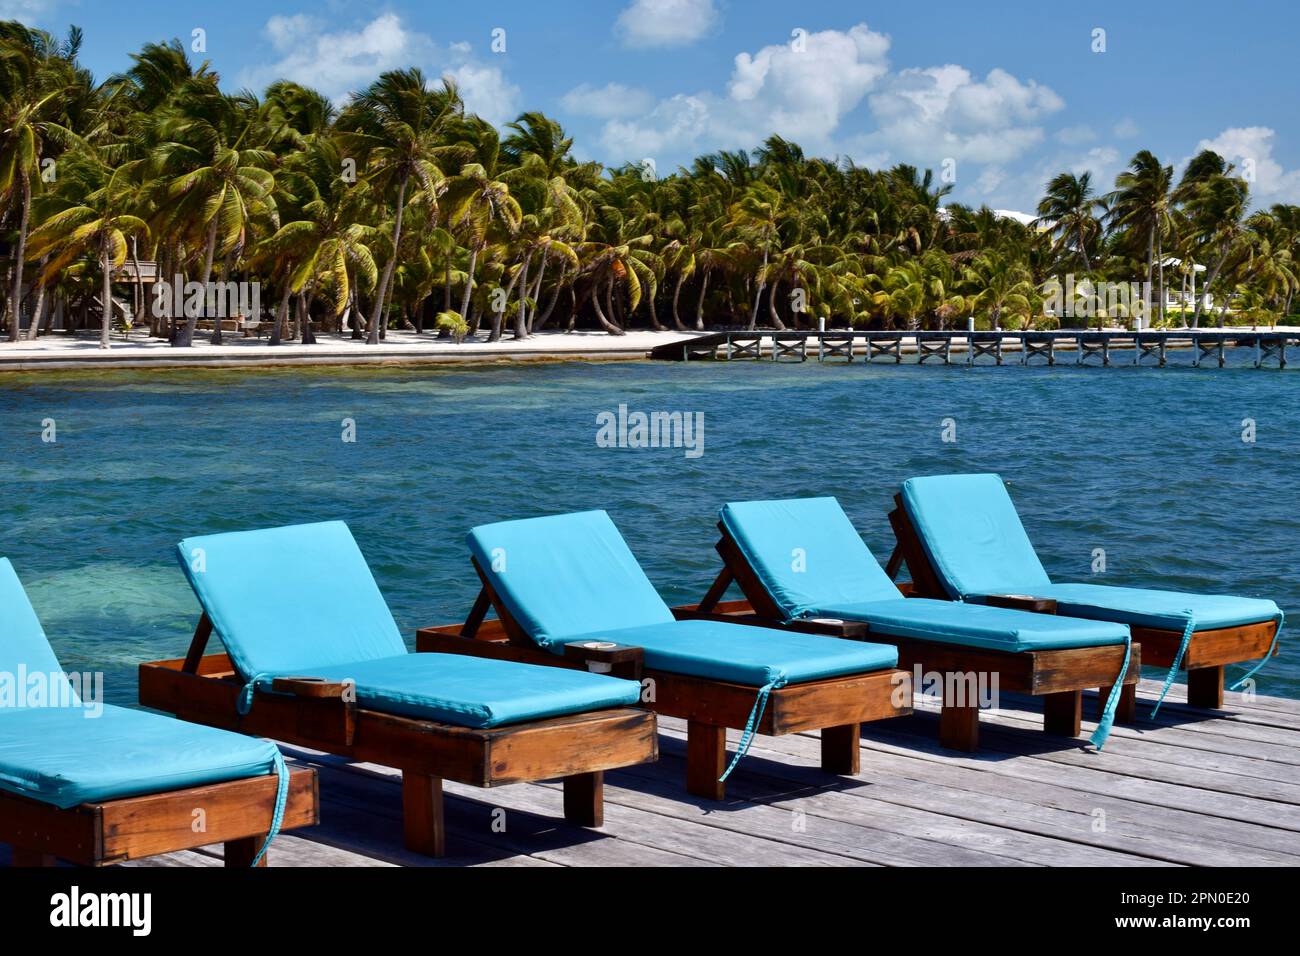 A row of blue beach chairs, facing the sea, with the beach and palm trees in the background in San Pedro, Ambergris Caye, Belize, Caribbean. Stock Photo